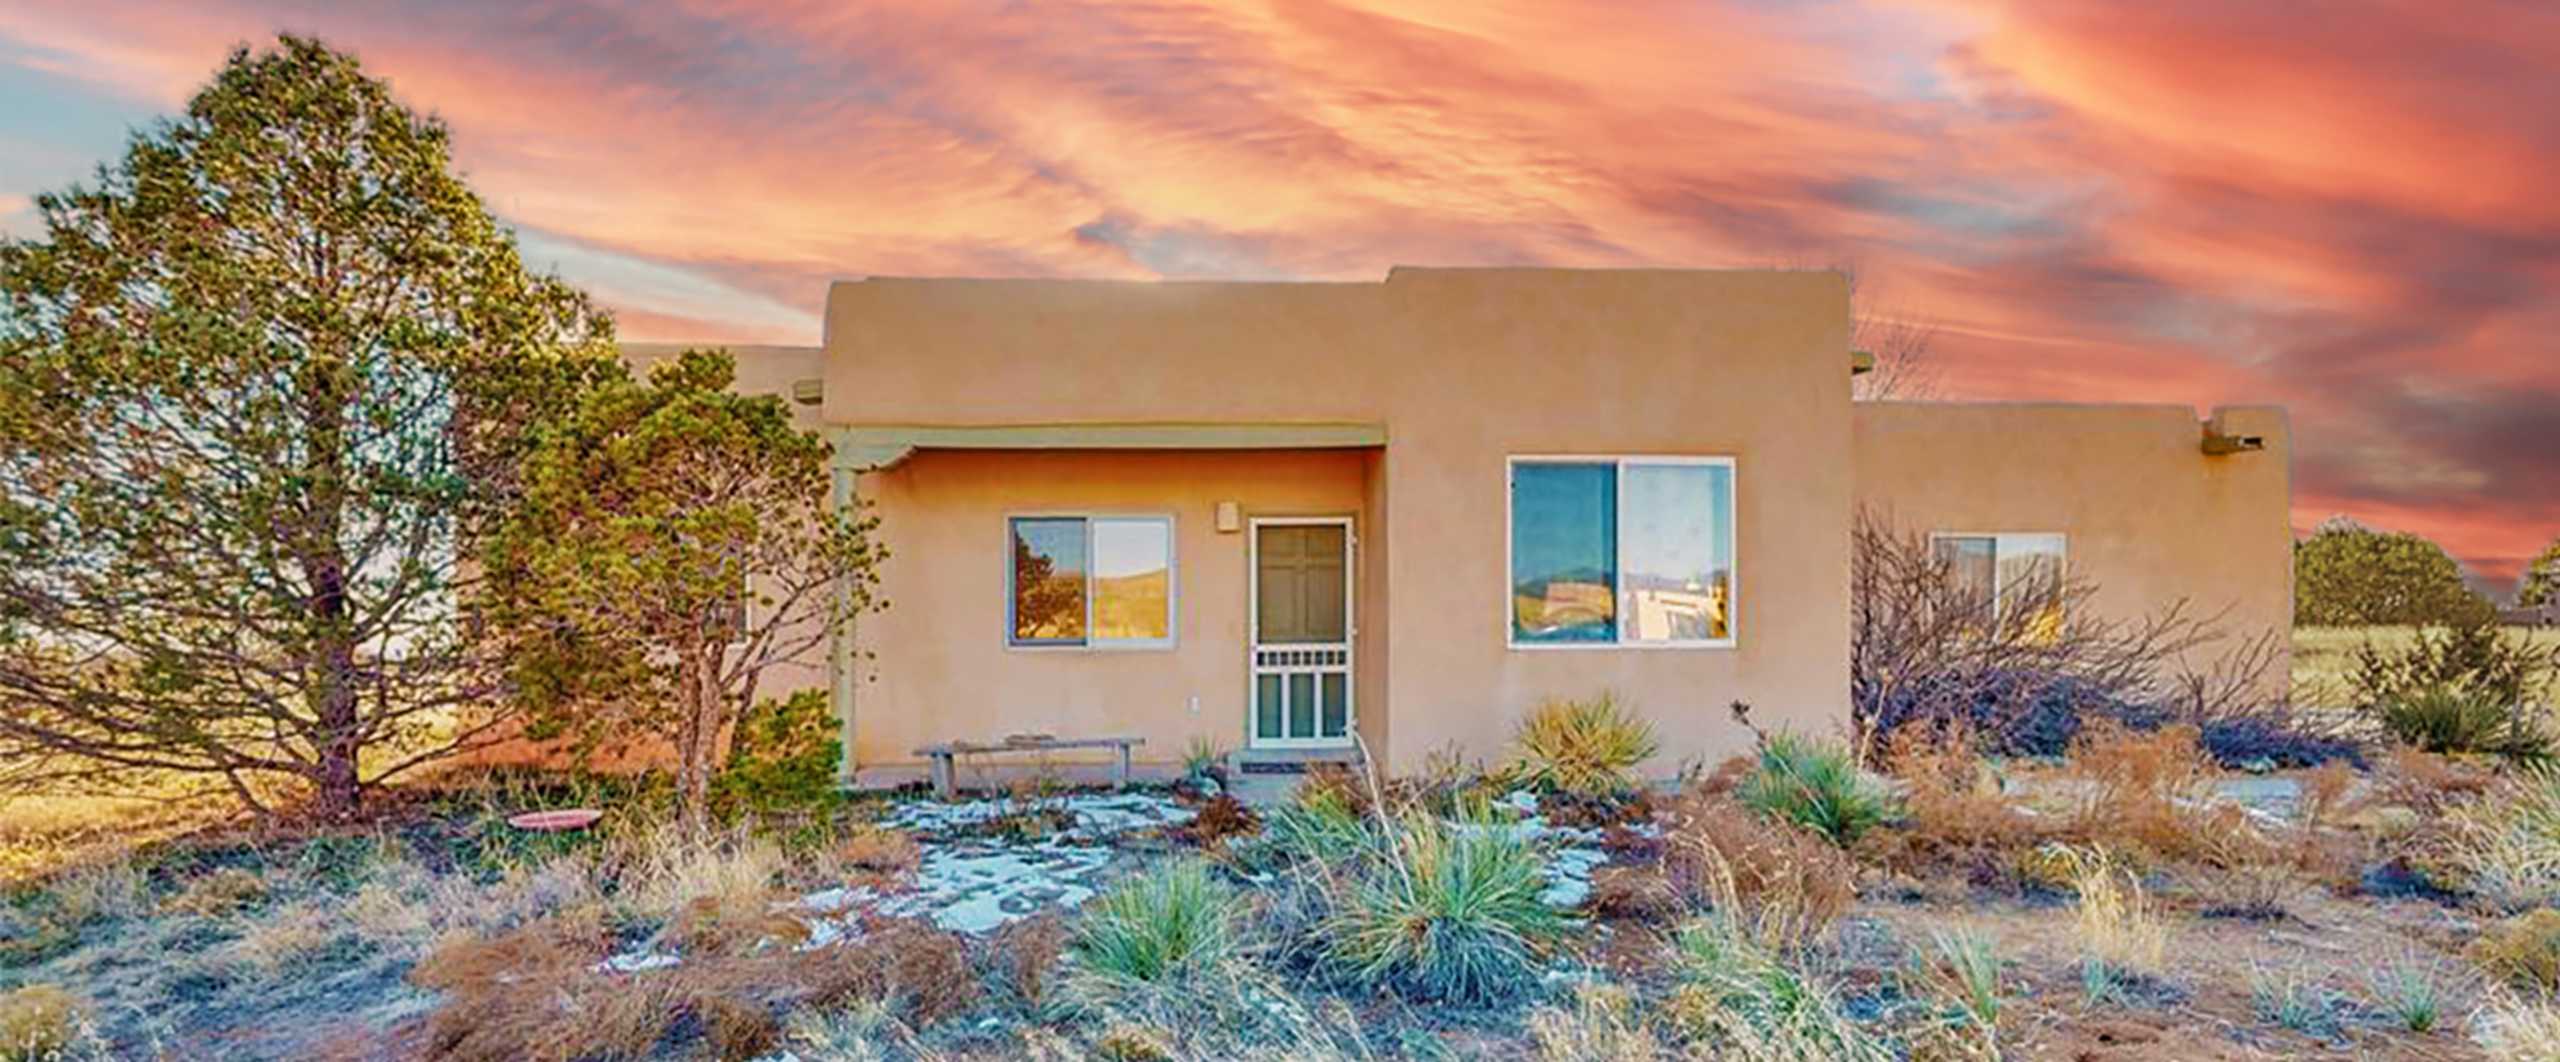 REMARKABLE OPPORTUNITY, GREAT PRICE  ::  4 CALIENTE PLACE  ::  $439,950